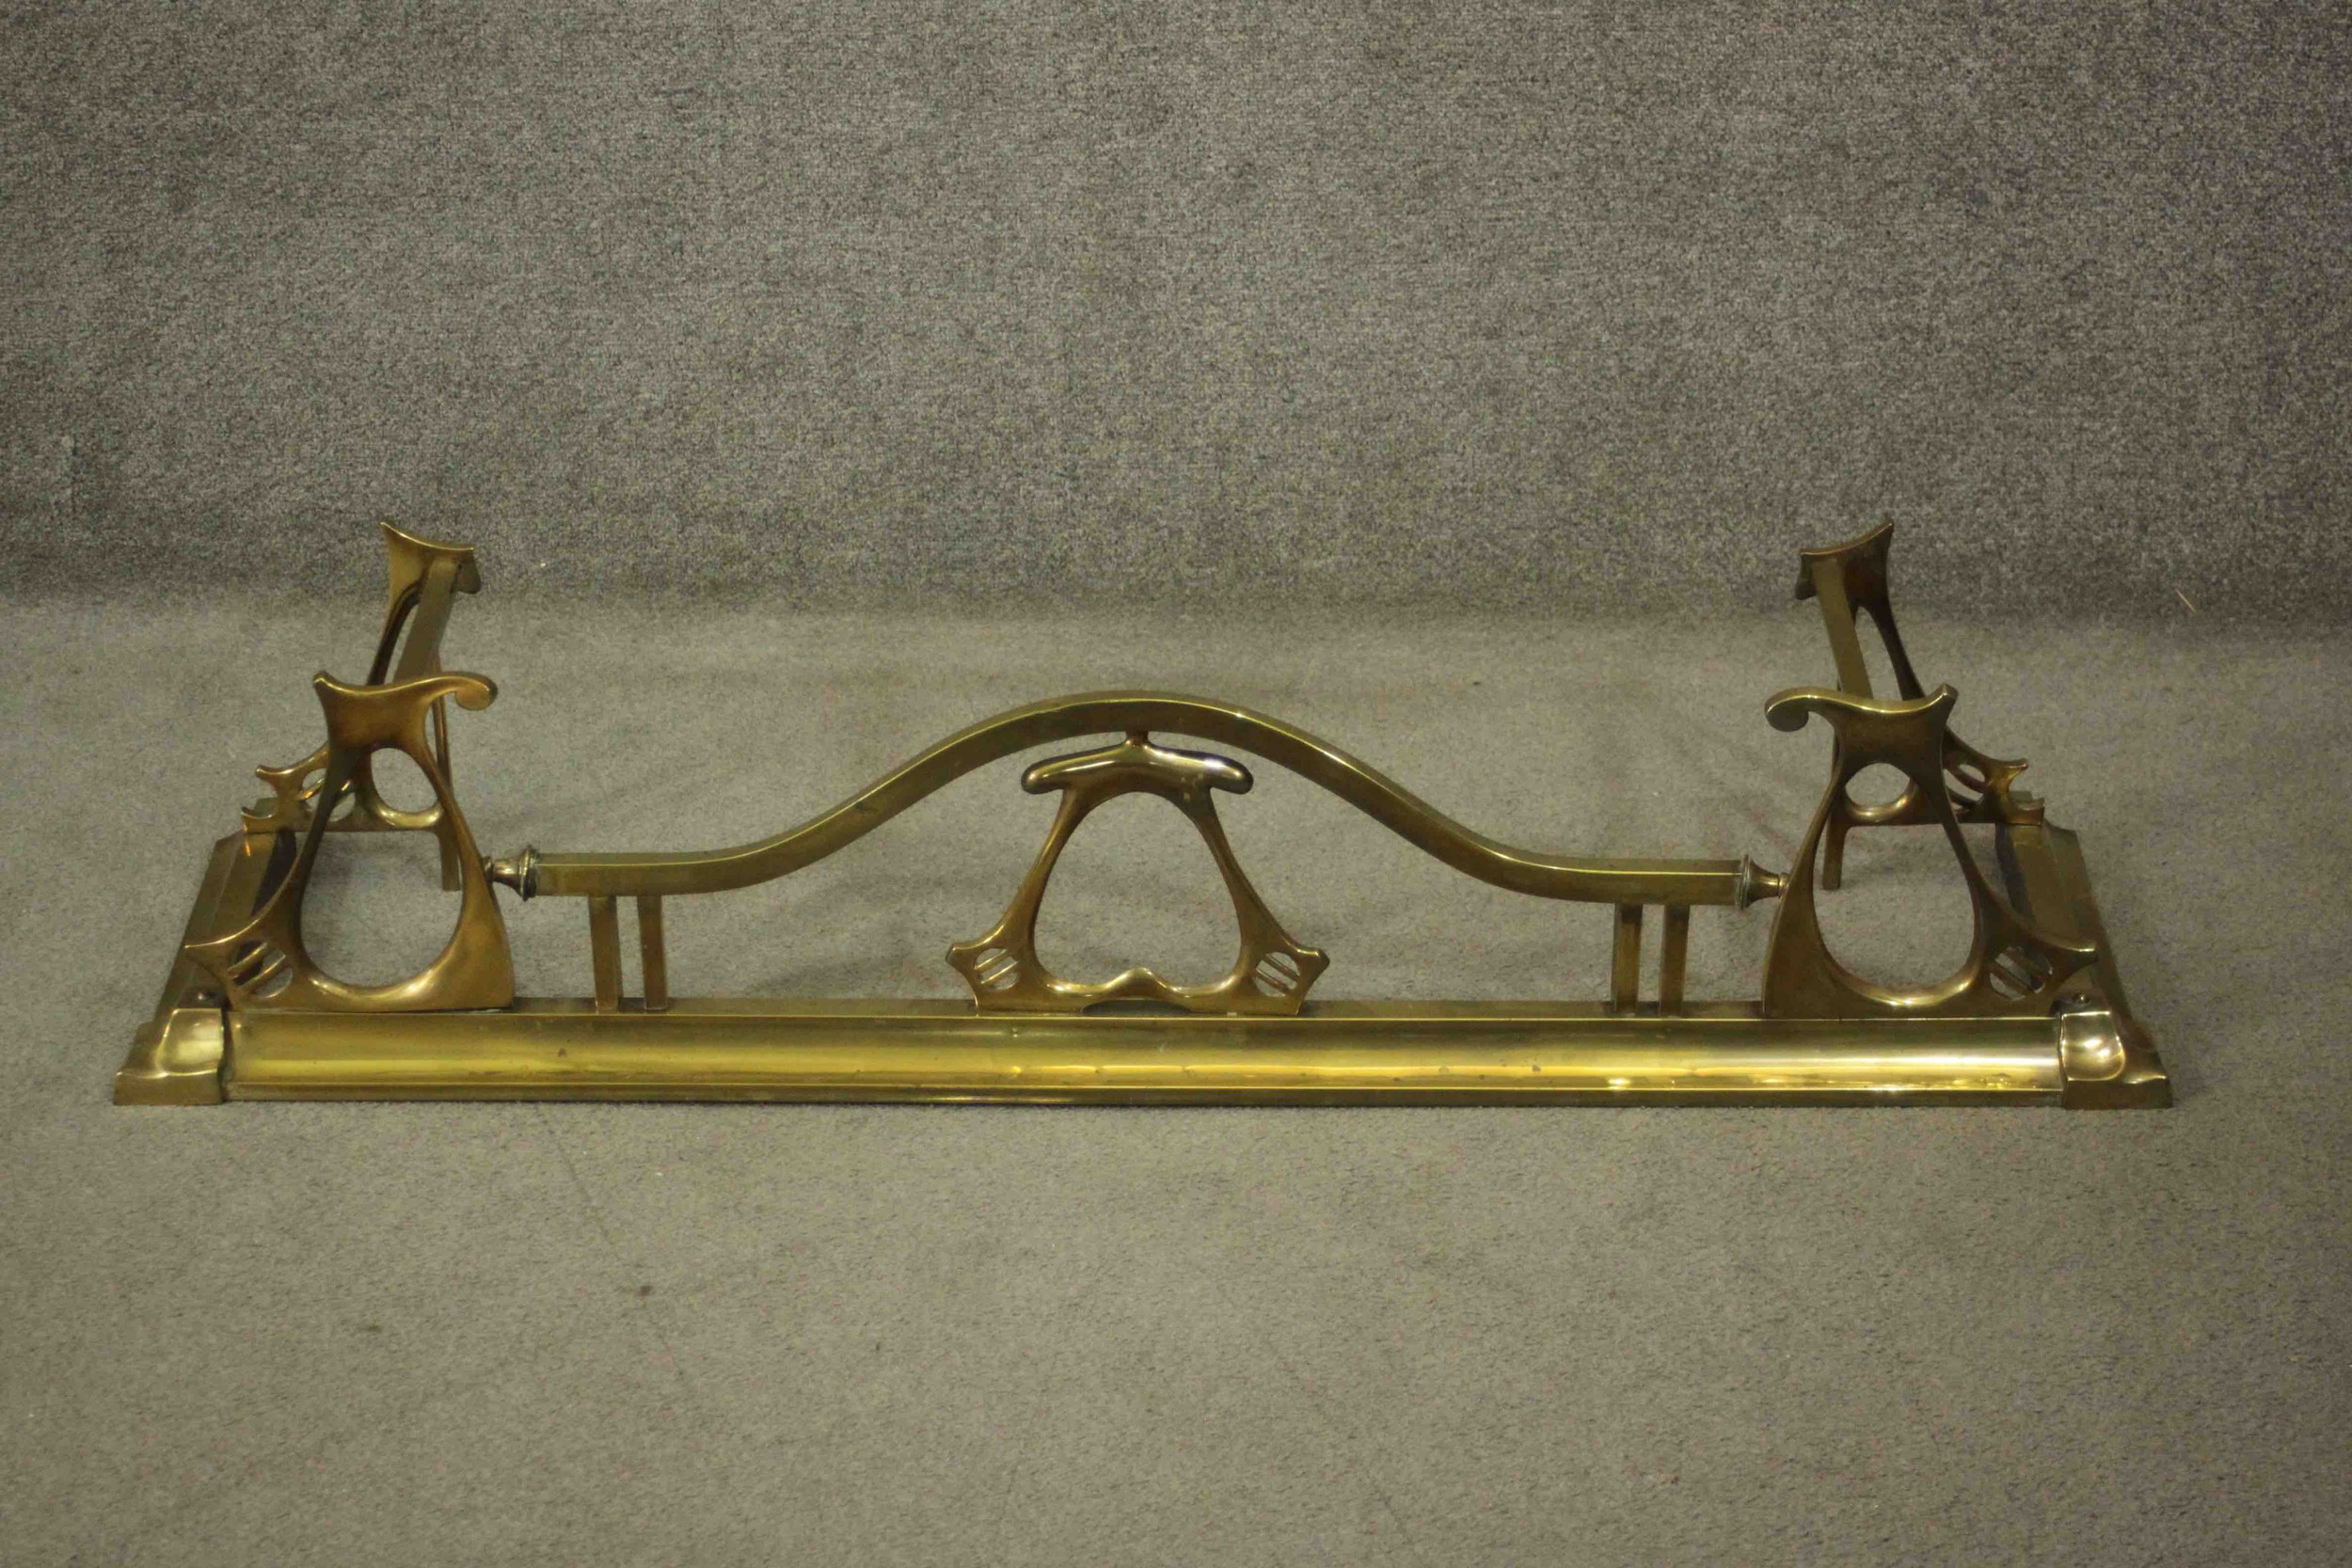 A 19th Century Art Nouveau brass fire fender with sloped edge with typical Art Nouveau scroll work